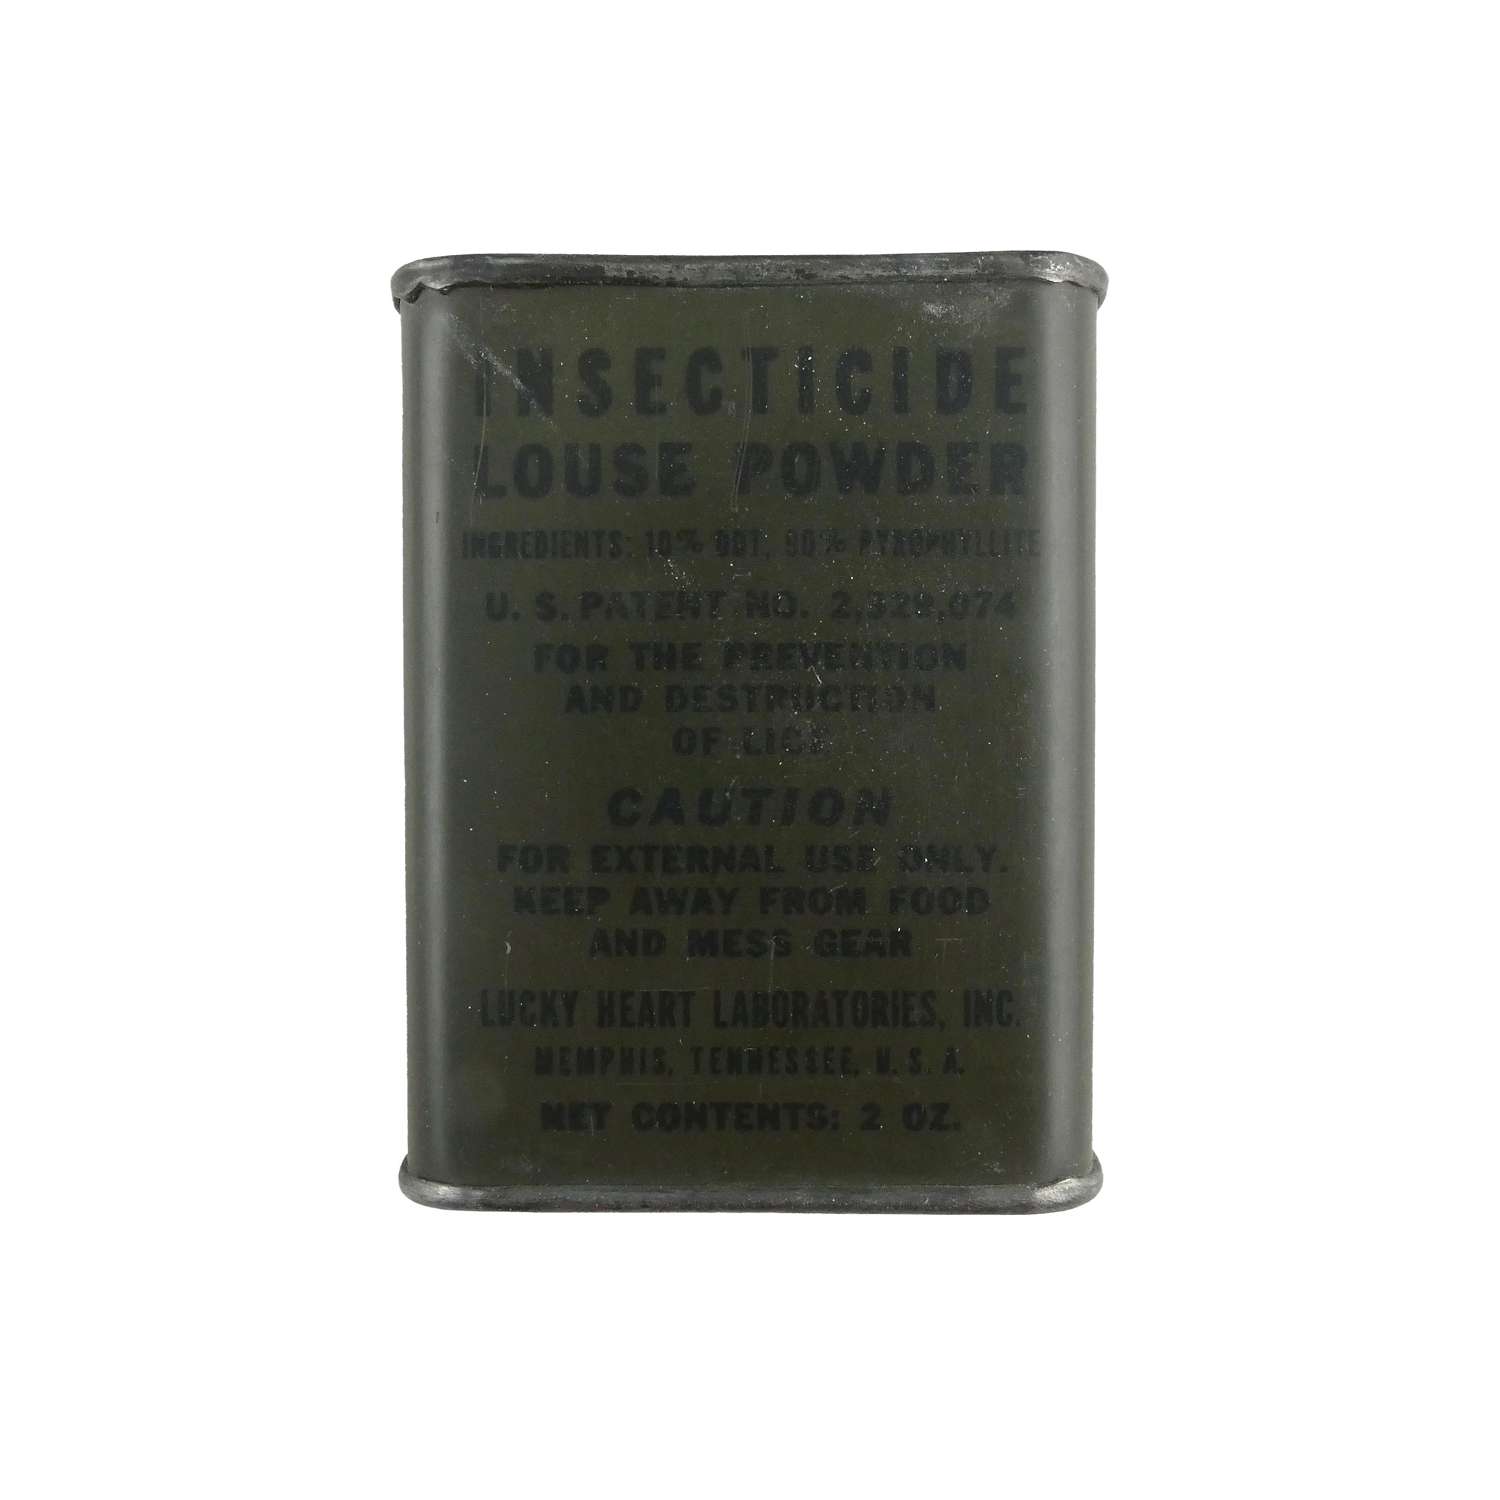 WW2 US Forces insecticide louse powder tin with contents